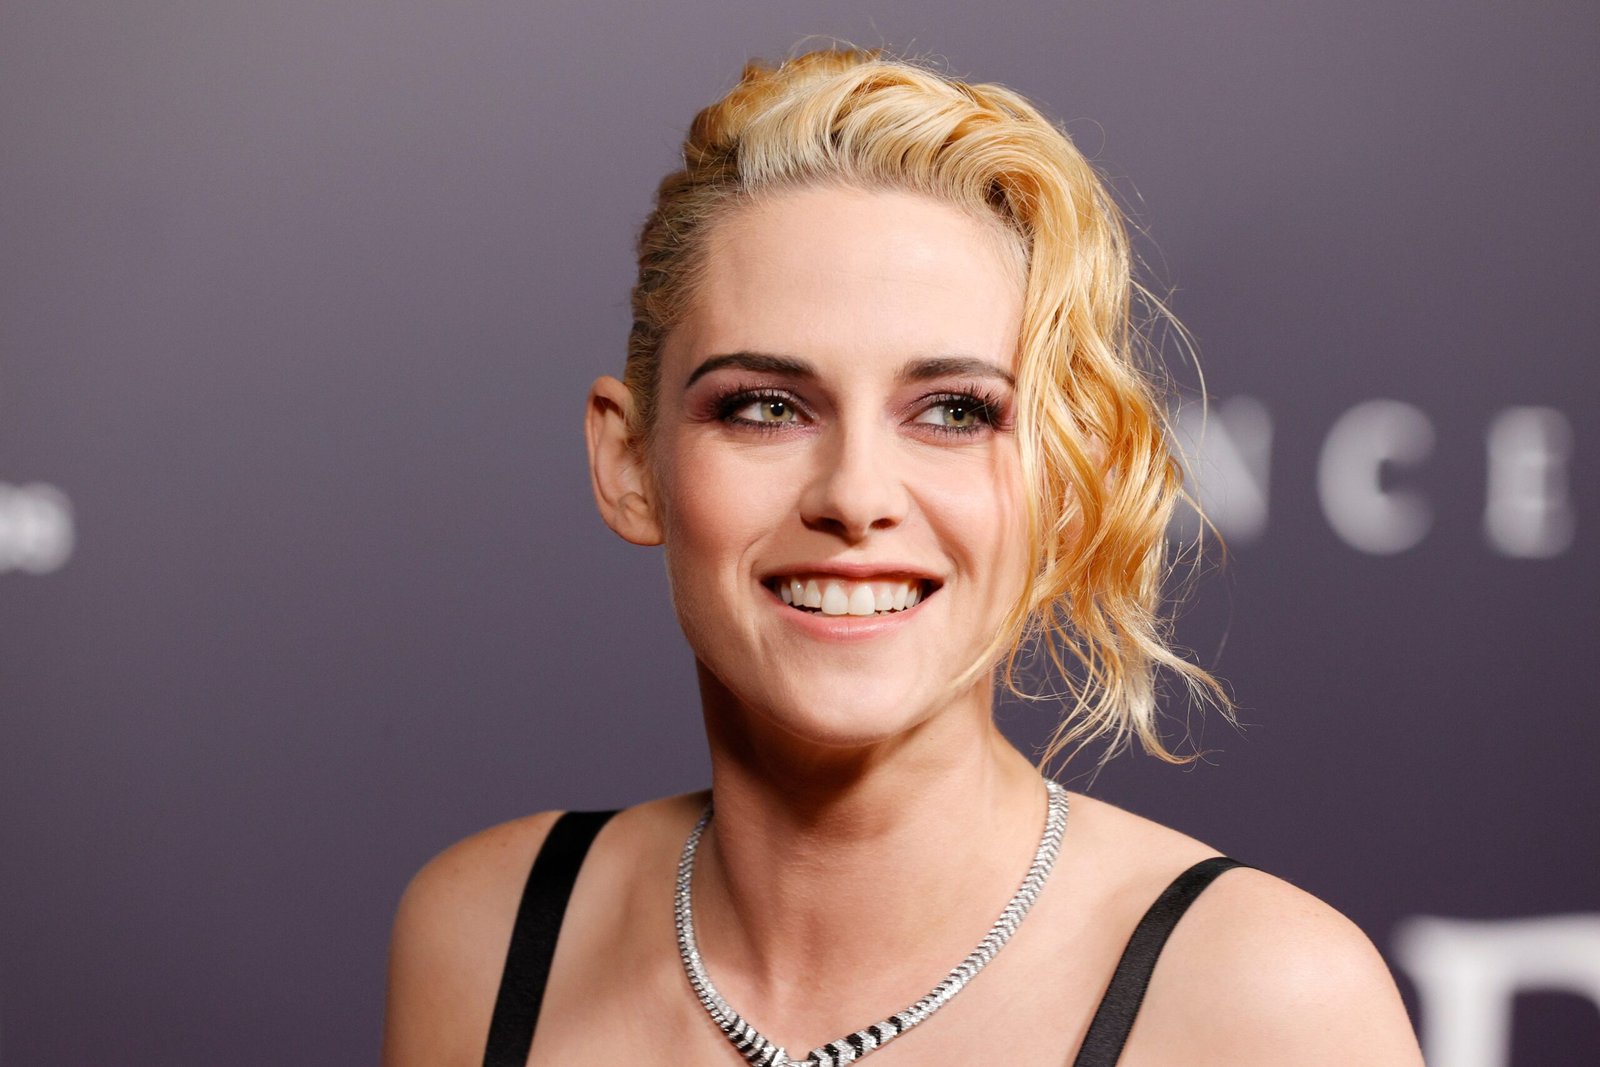 Kristen Stewart Wore a Prick High and Skirt Space in a Shade That’s Very Laborious to Pull Off